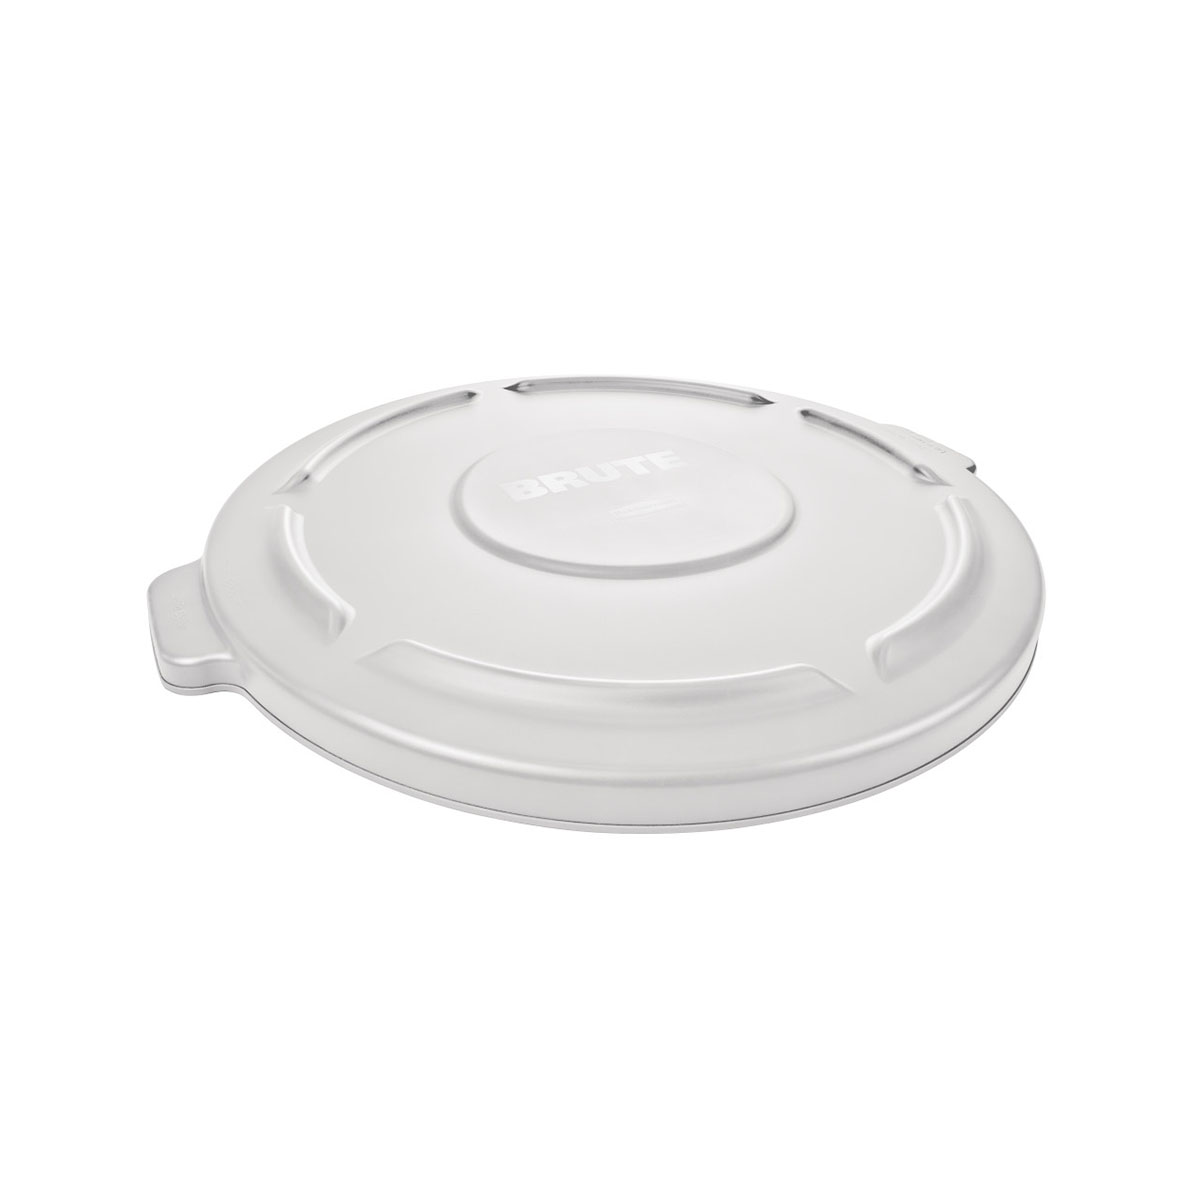 Rubbermaid Rubbermaid FG263100 Lid (Only) for 32-Gallon Round Brute Container # 2632 - White